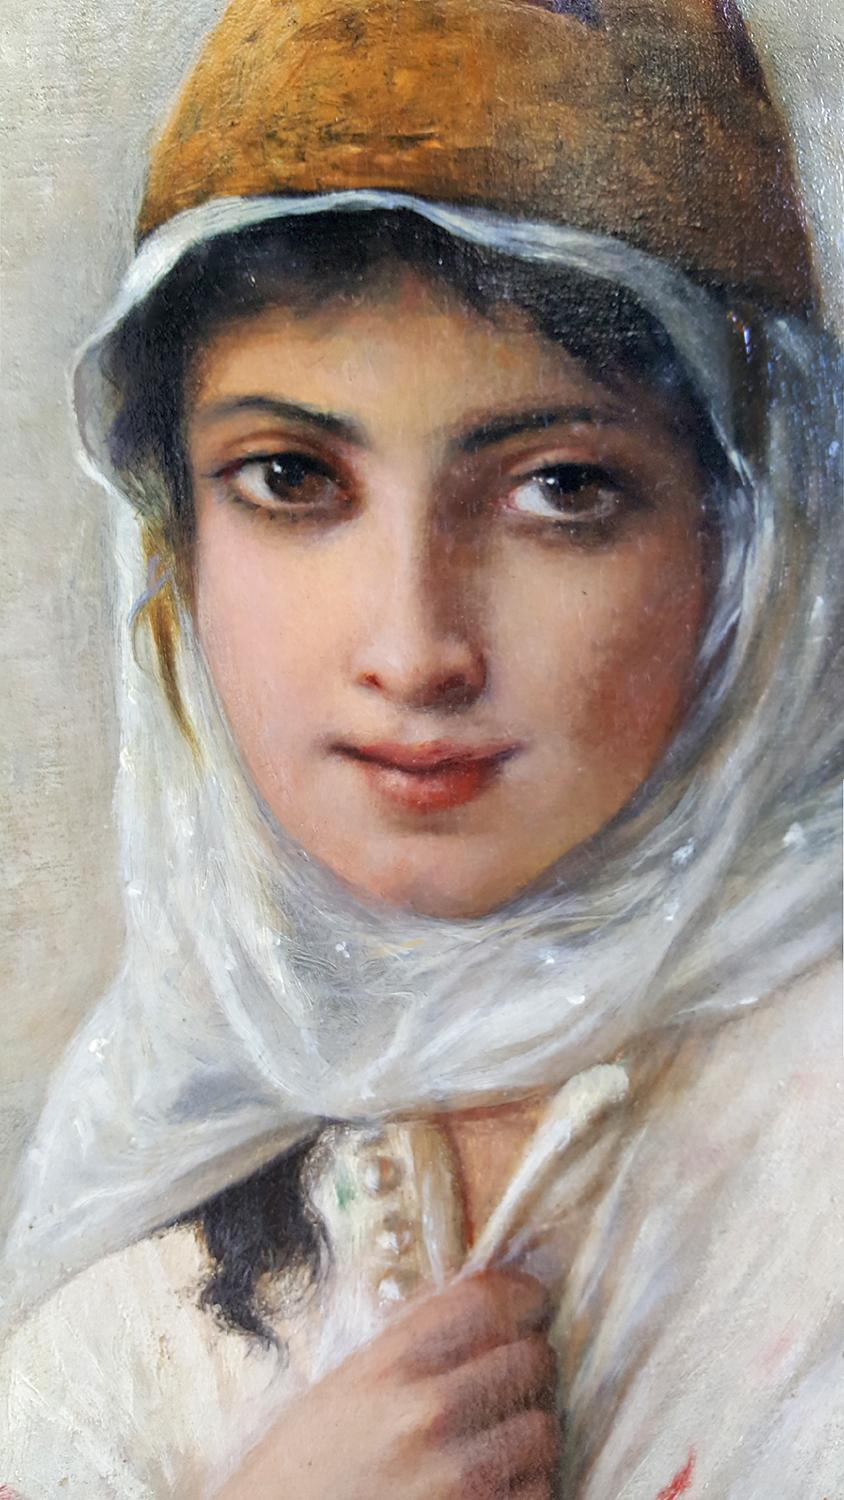 Beautiful Orientalist  painting  - The Framed size: 47 inches x 34.5 inches.   Magnificent ornate Frame
The work looks much better in person as if it came out of the Musée d'Orsay in Paris

The paint surface looks like the style of William-Adolphe